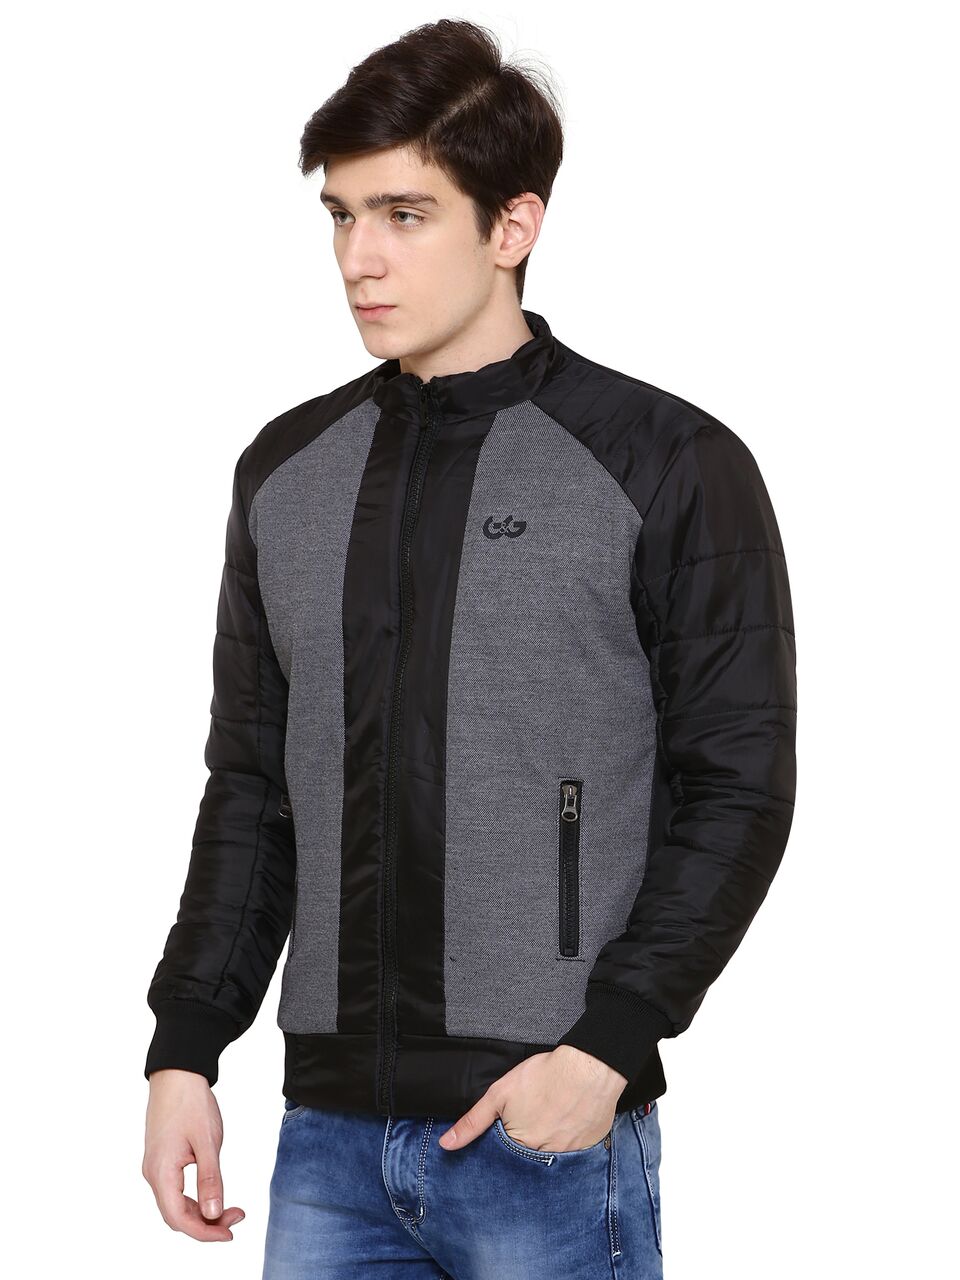 Buy The Mens Stop Black & Grey Jacket-TMS 101 -M Online @ ₹999 from ...